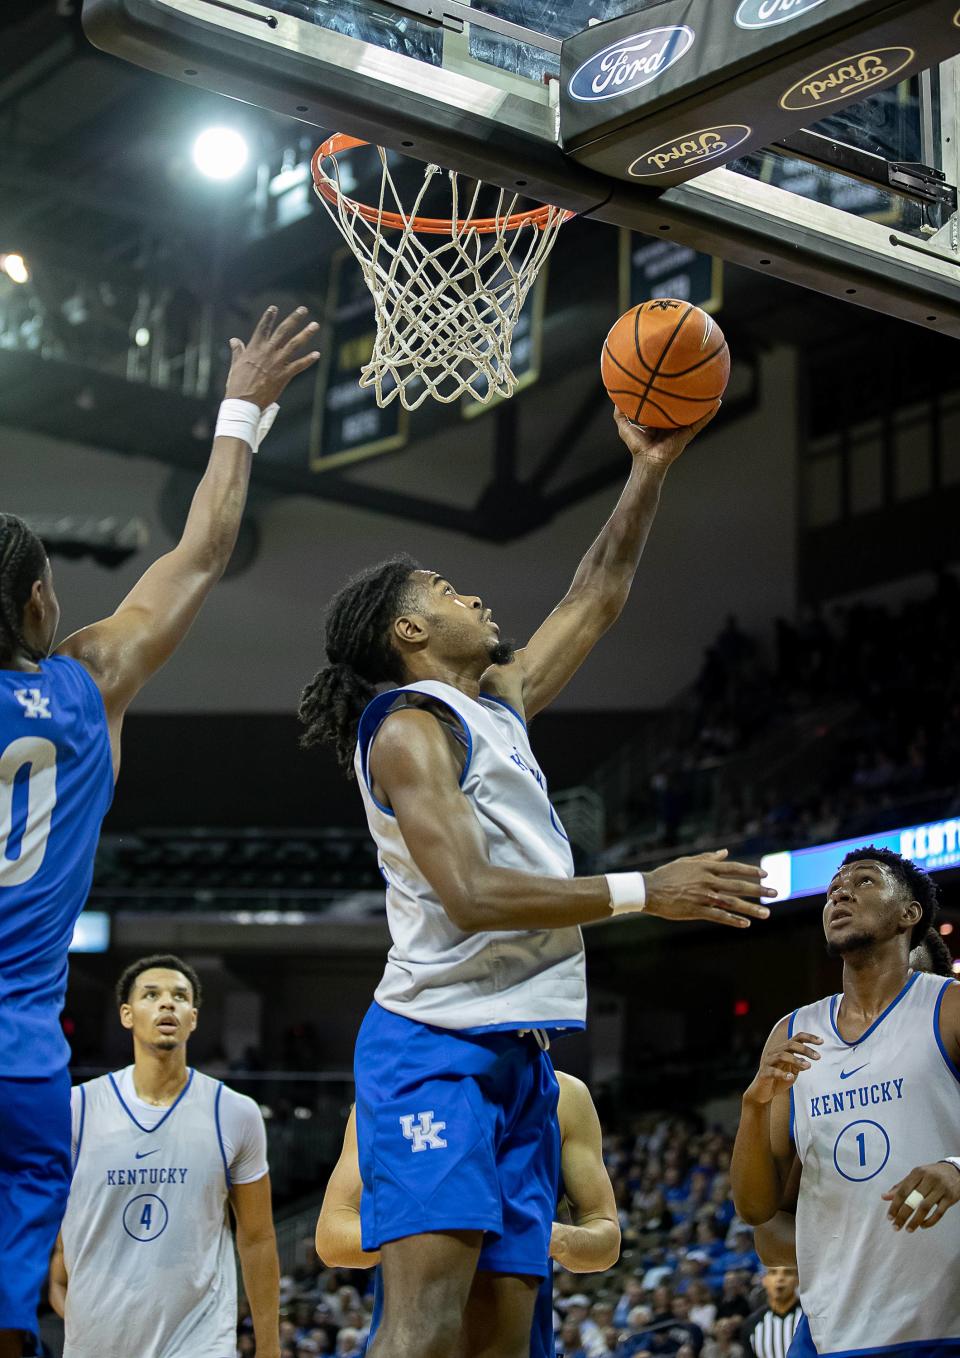 Kentucky's Antonio Reeves dropped in a reverse layup during the Blue-White scrimmage last weekend. Reeves played well, but the White squad lost.